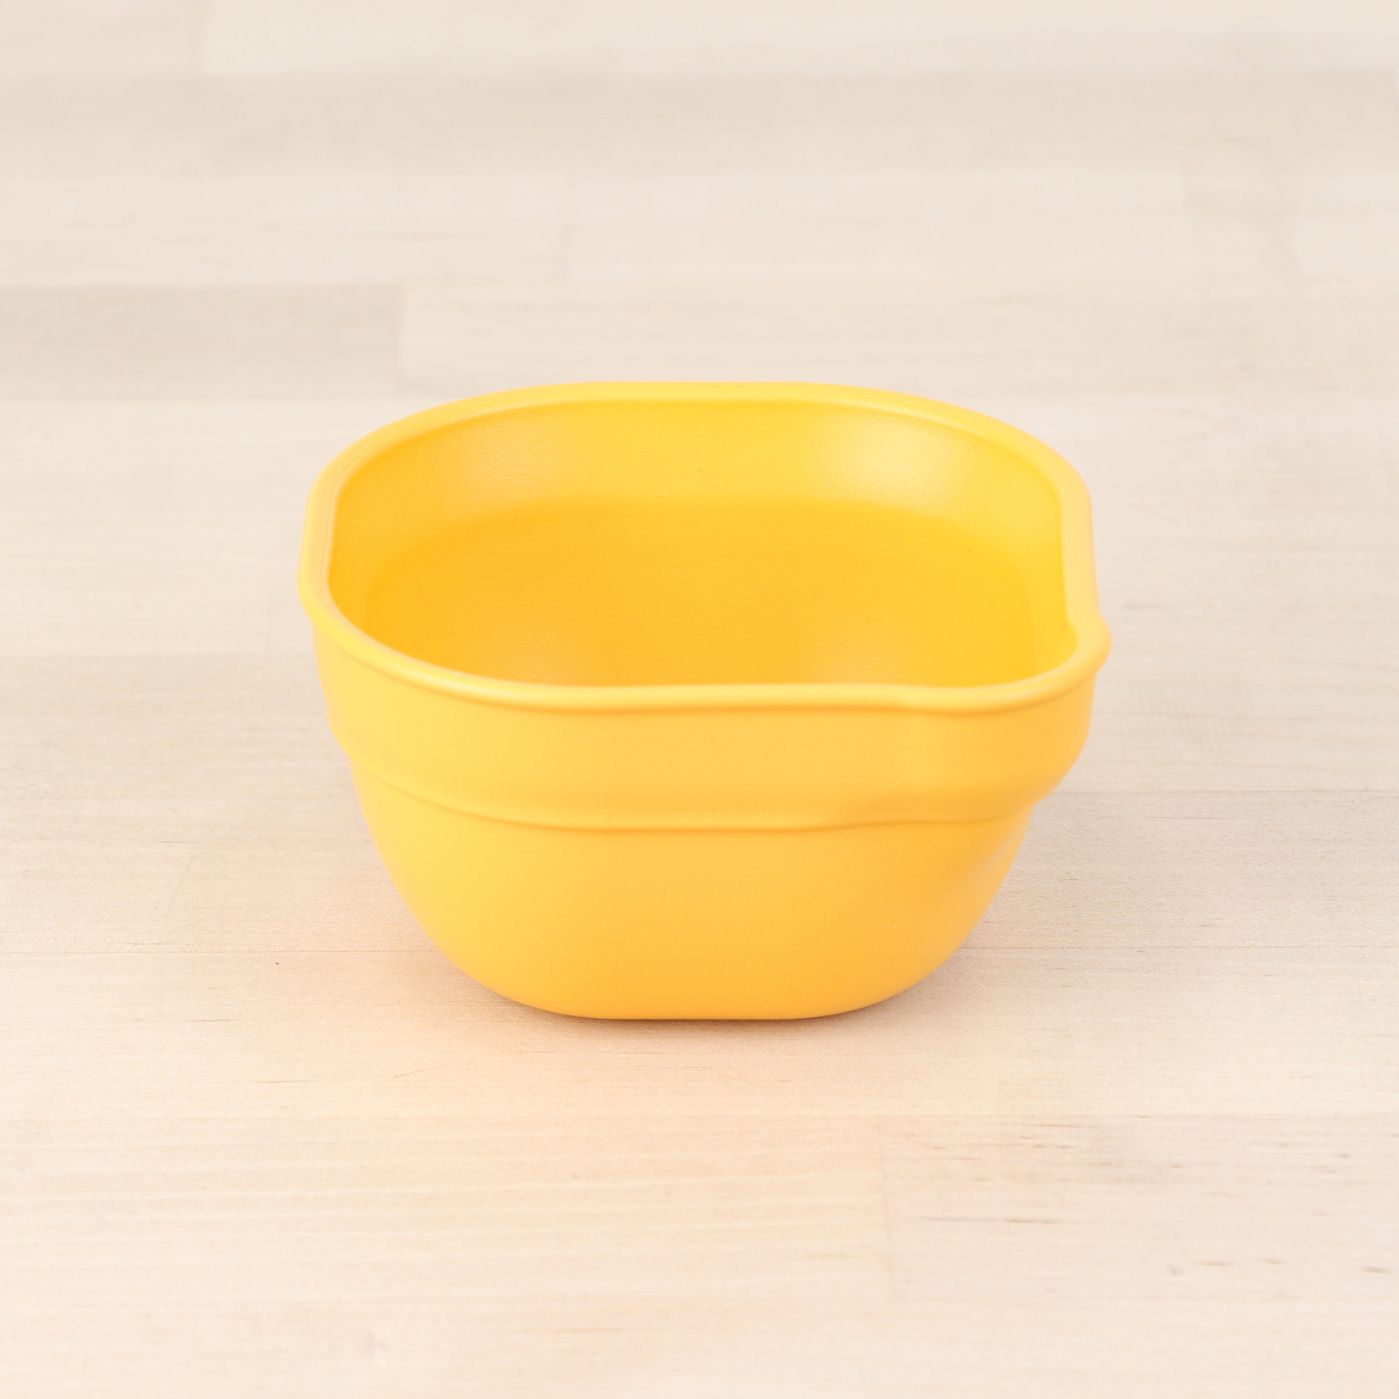 sunny yellow replay dip and pour bowls made out of recycled plastic - Mikki and Me Kids